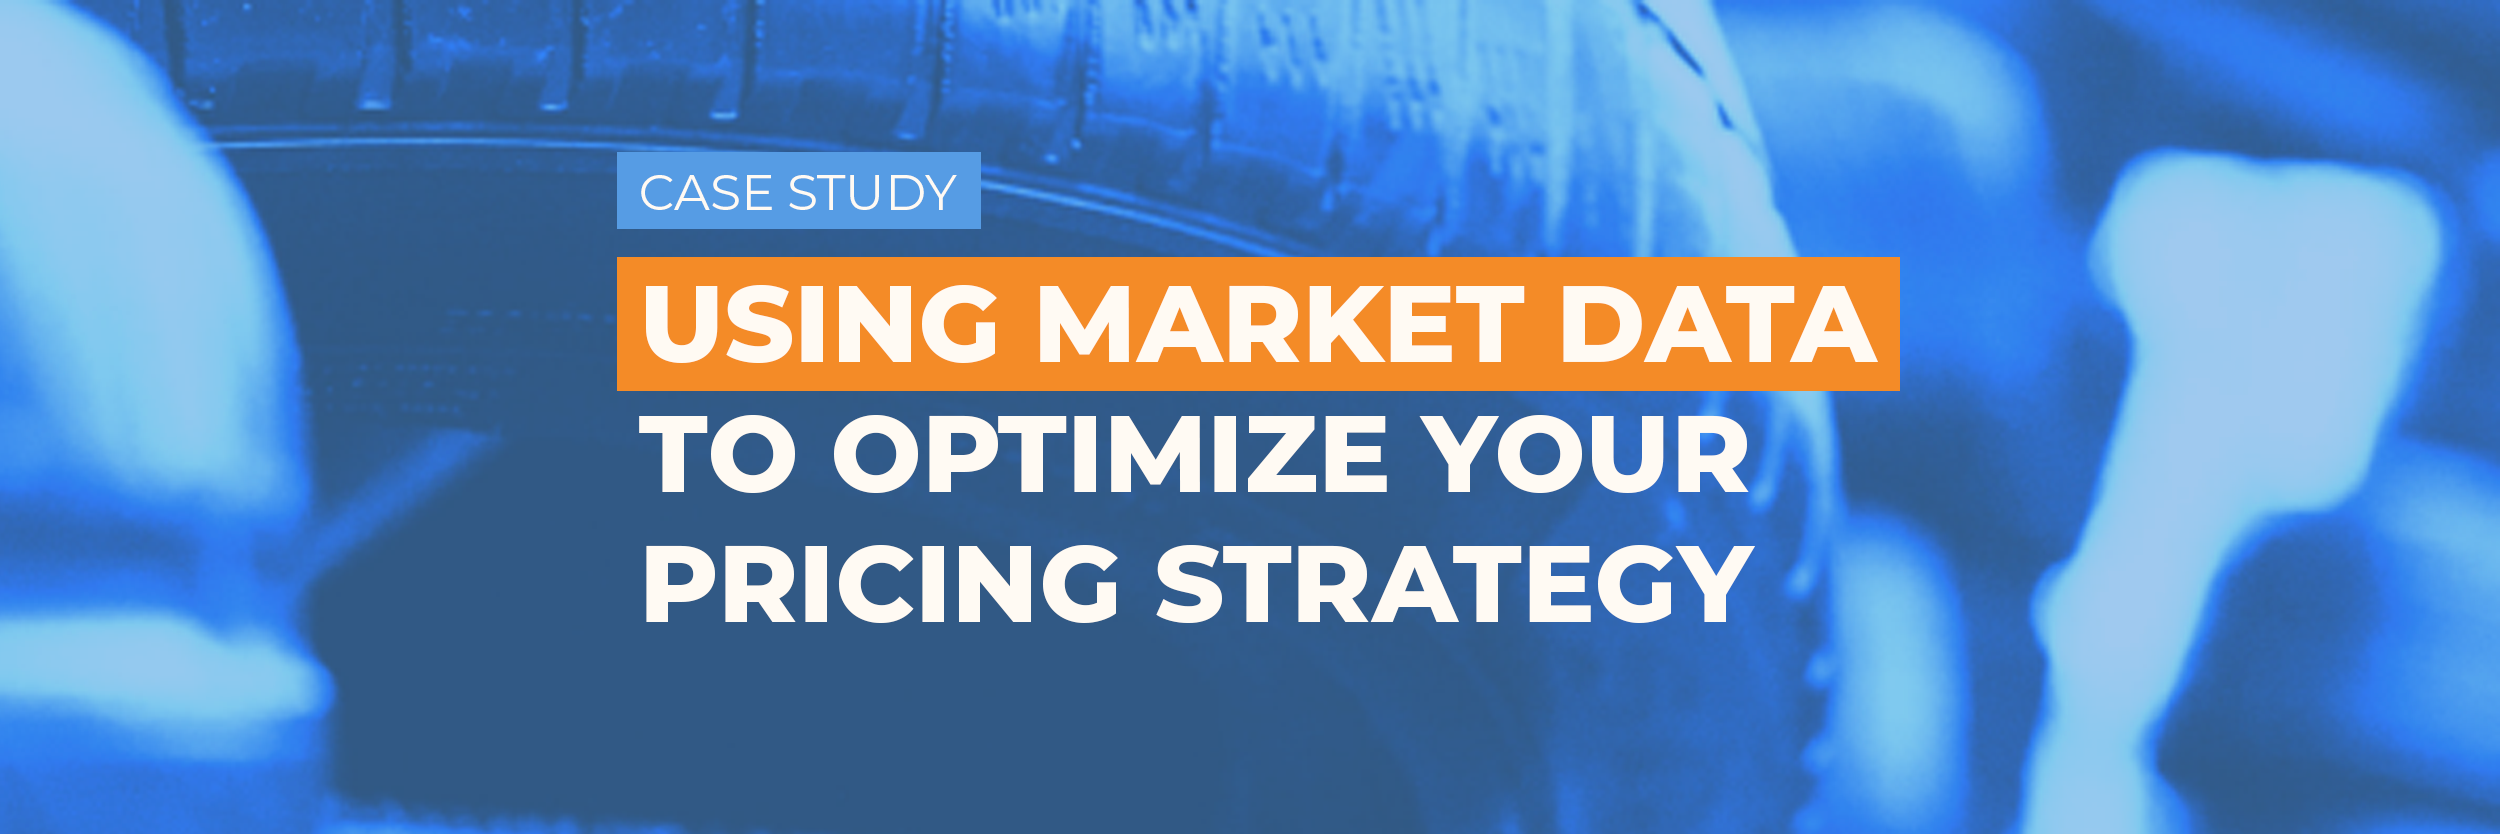 [Case study] An optimised pricing strategy using data